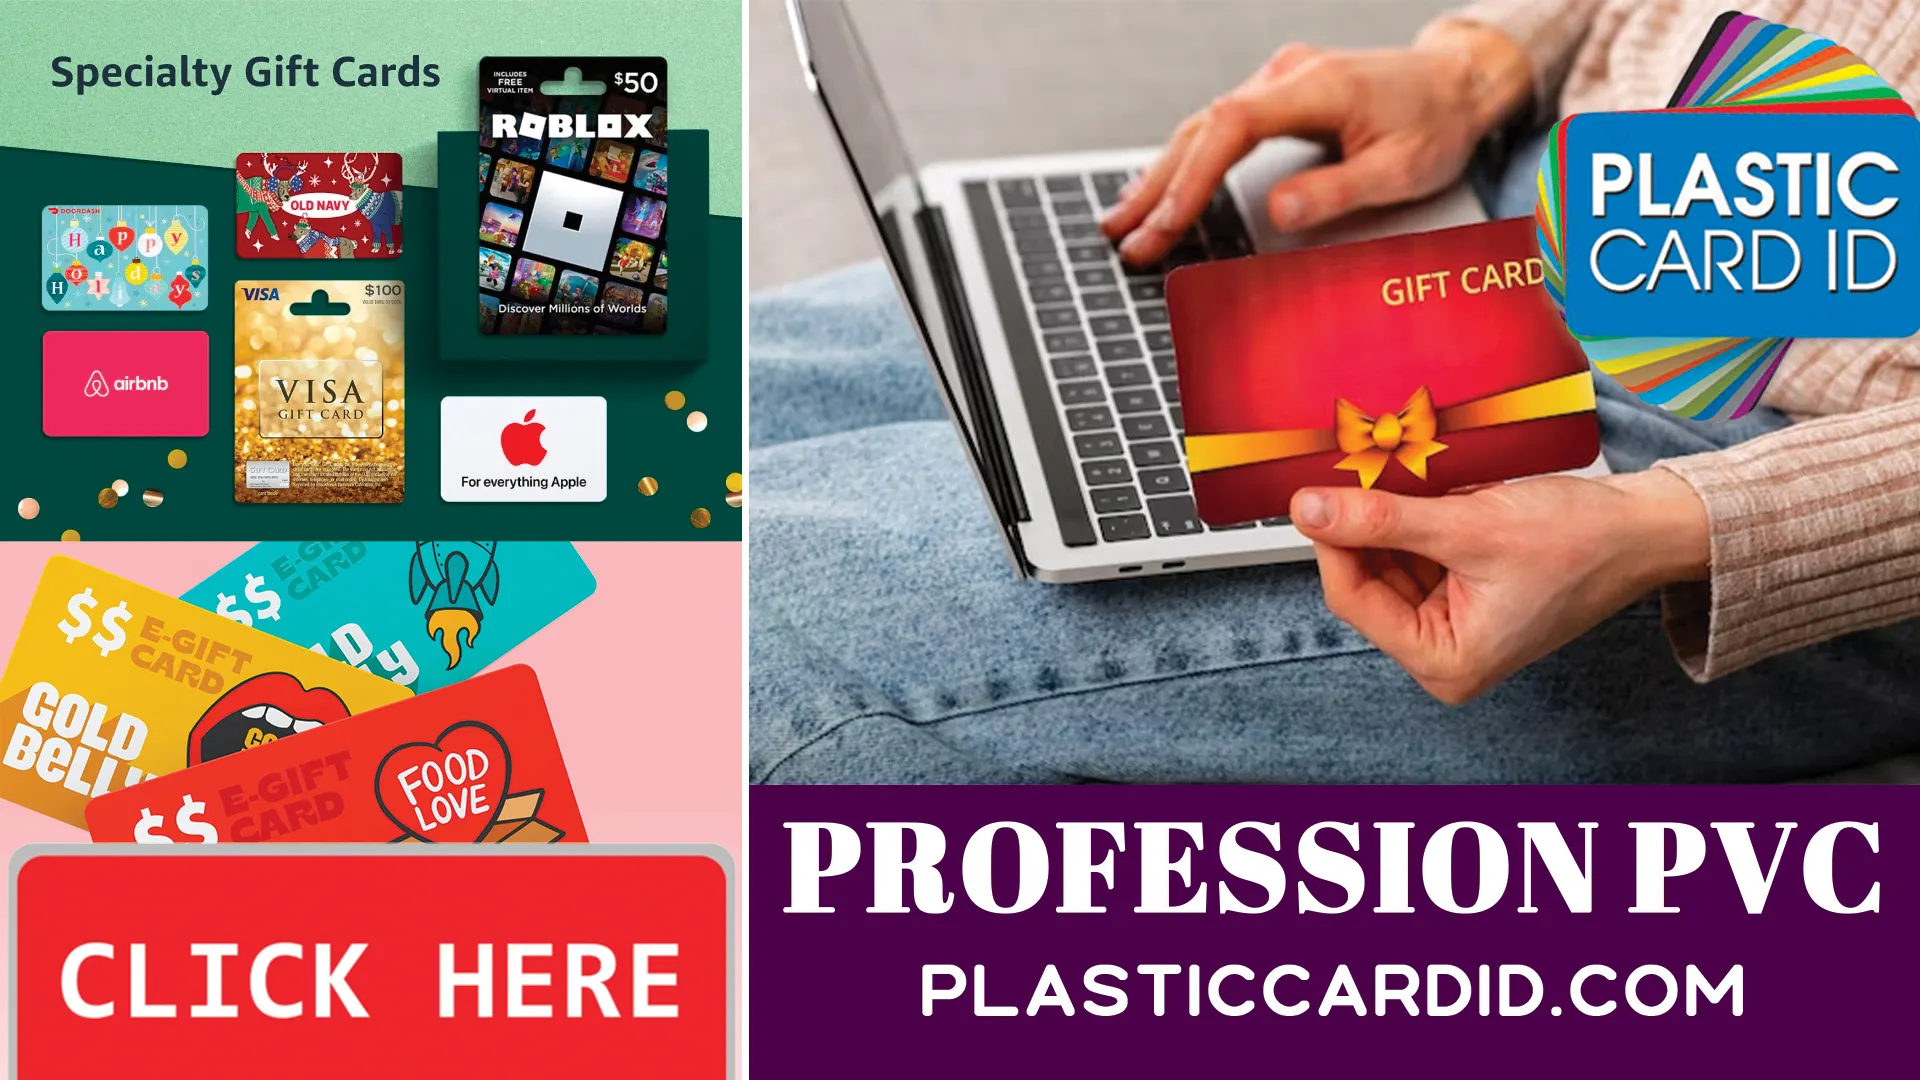 Welcome to the Durable and Versatile World of Plastic Cards at Plastic Card ID




